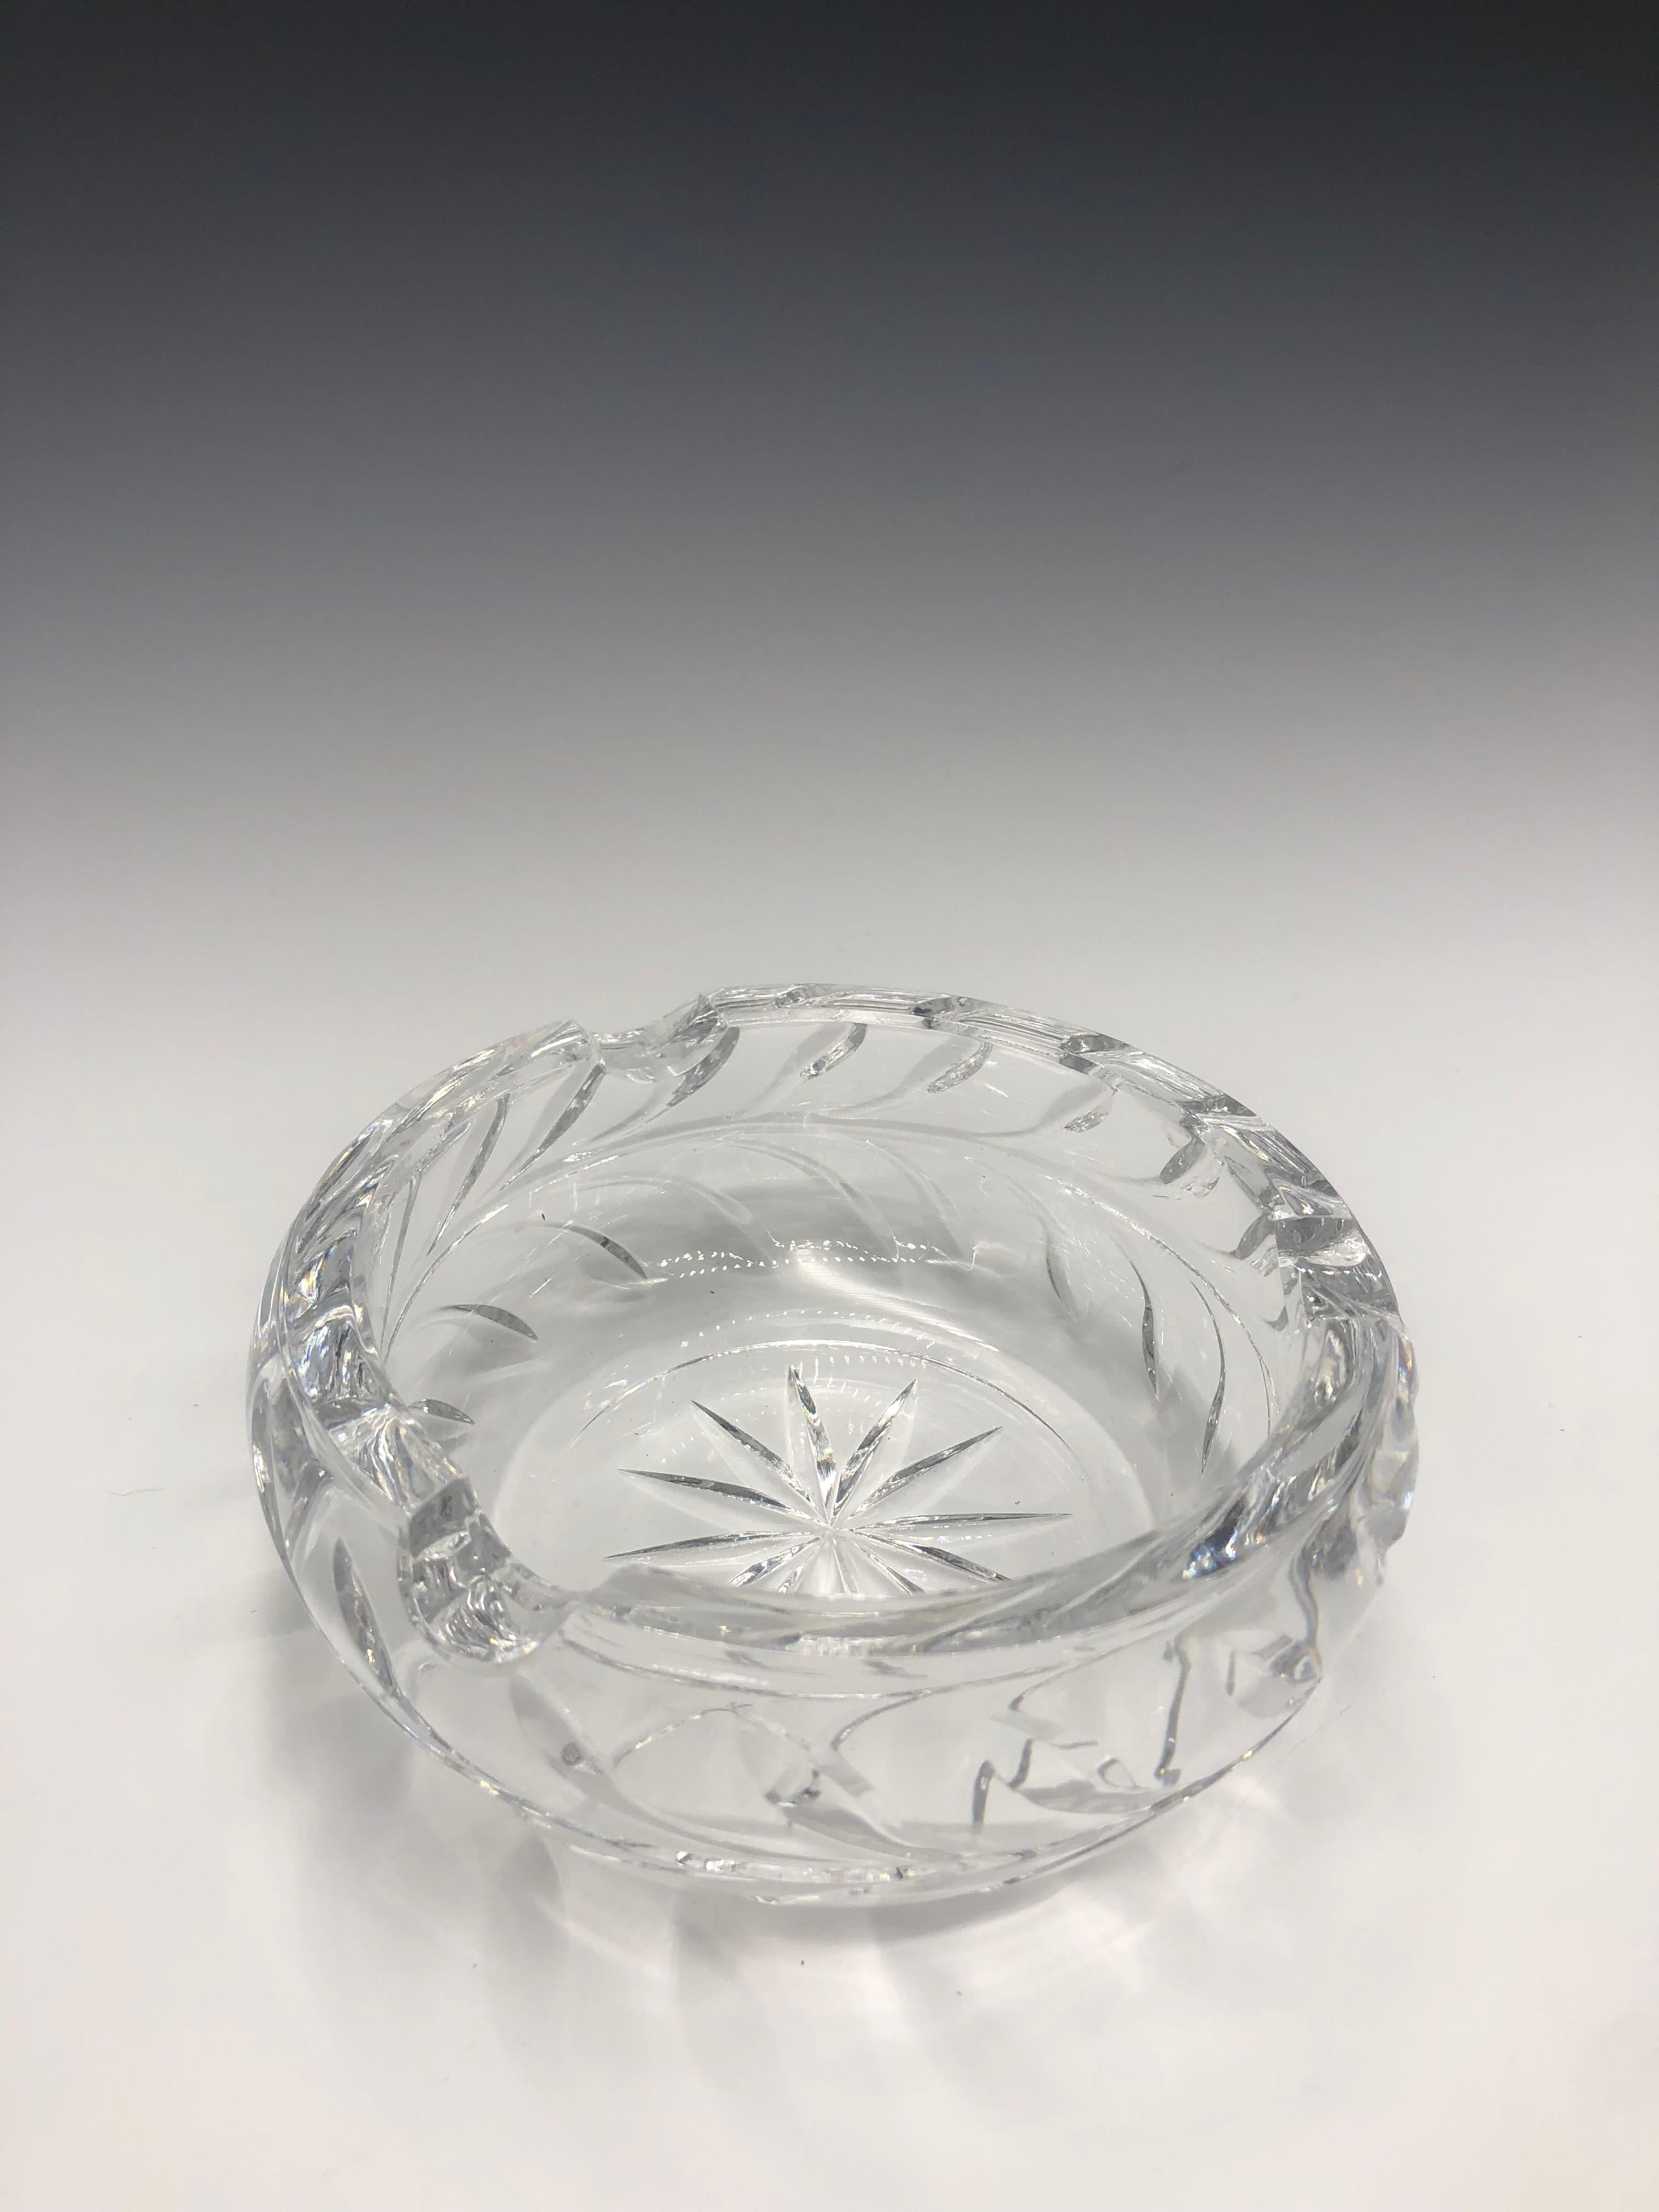 Clear thick unmarked round crystal cut glass ashtray in perfect condition. 

It has a star/sunburst cut motif in the center with leaf-cut design detail around the edges. 

It is a pretty decorative tabletop piece that can also be used as a